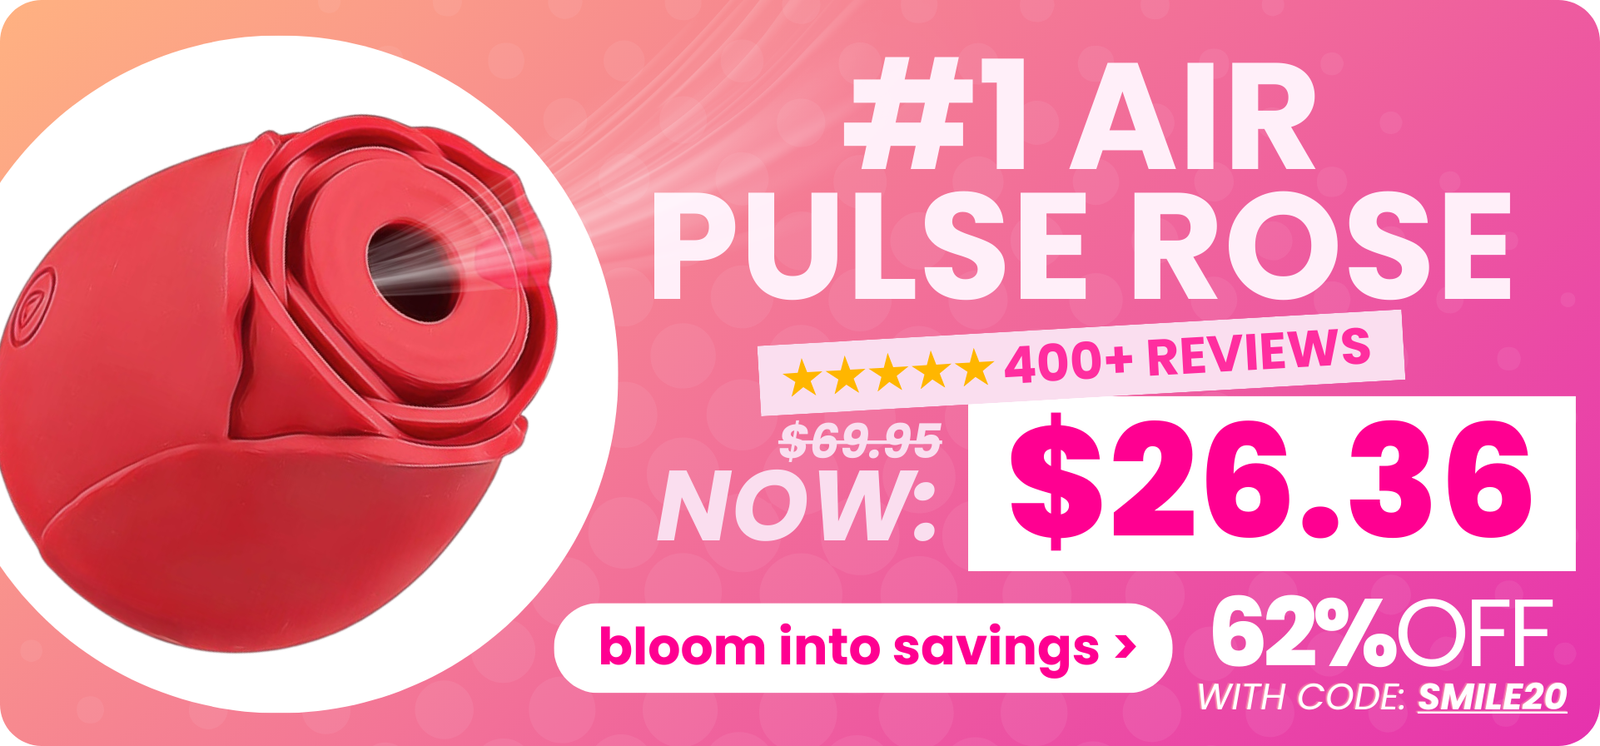 Get our #1 selling air pulse rose for $26.36 with code: SMILE20